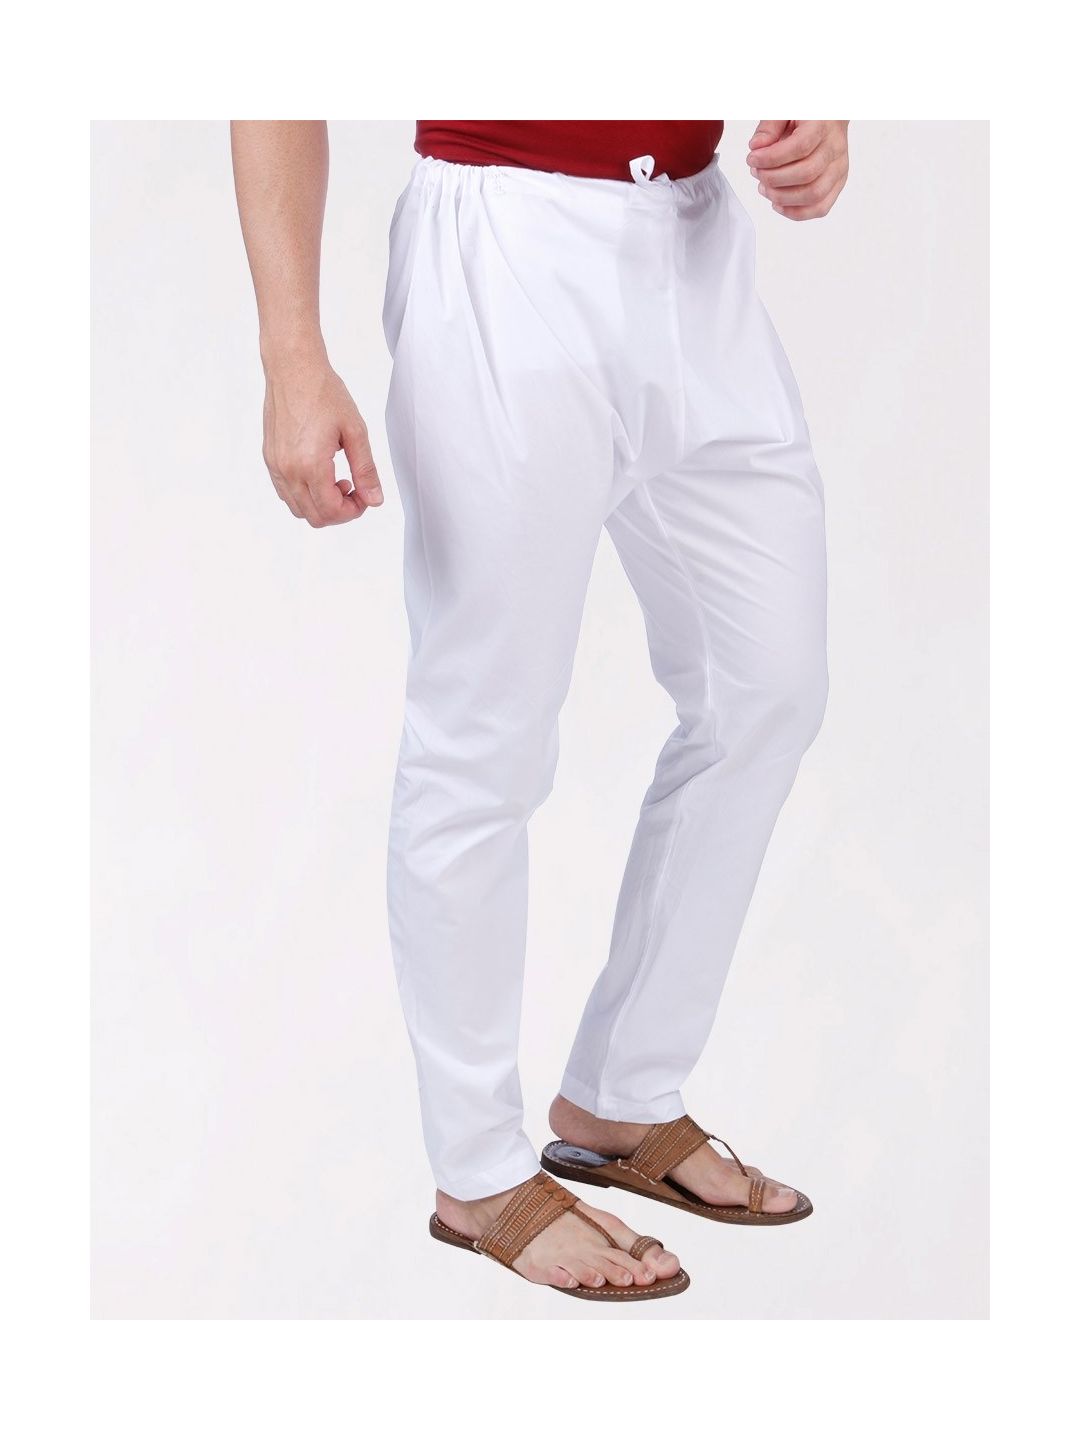 Casual Cotton Mens Cargo Pant White Color Cargo Cream Color Cargo  Relaxed Fit Cargo Good Quality